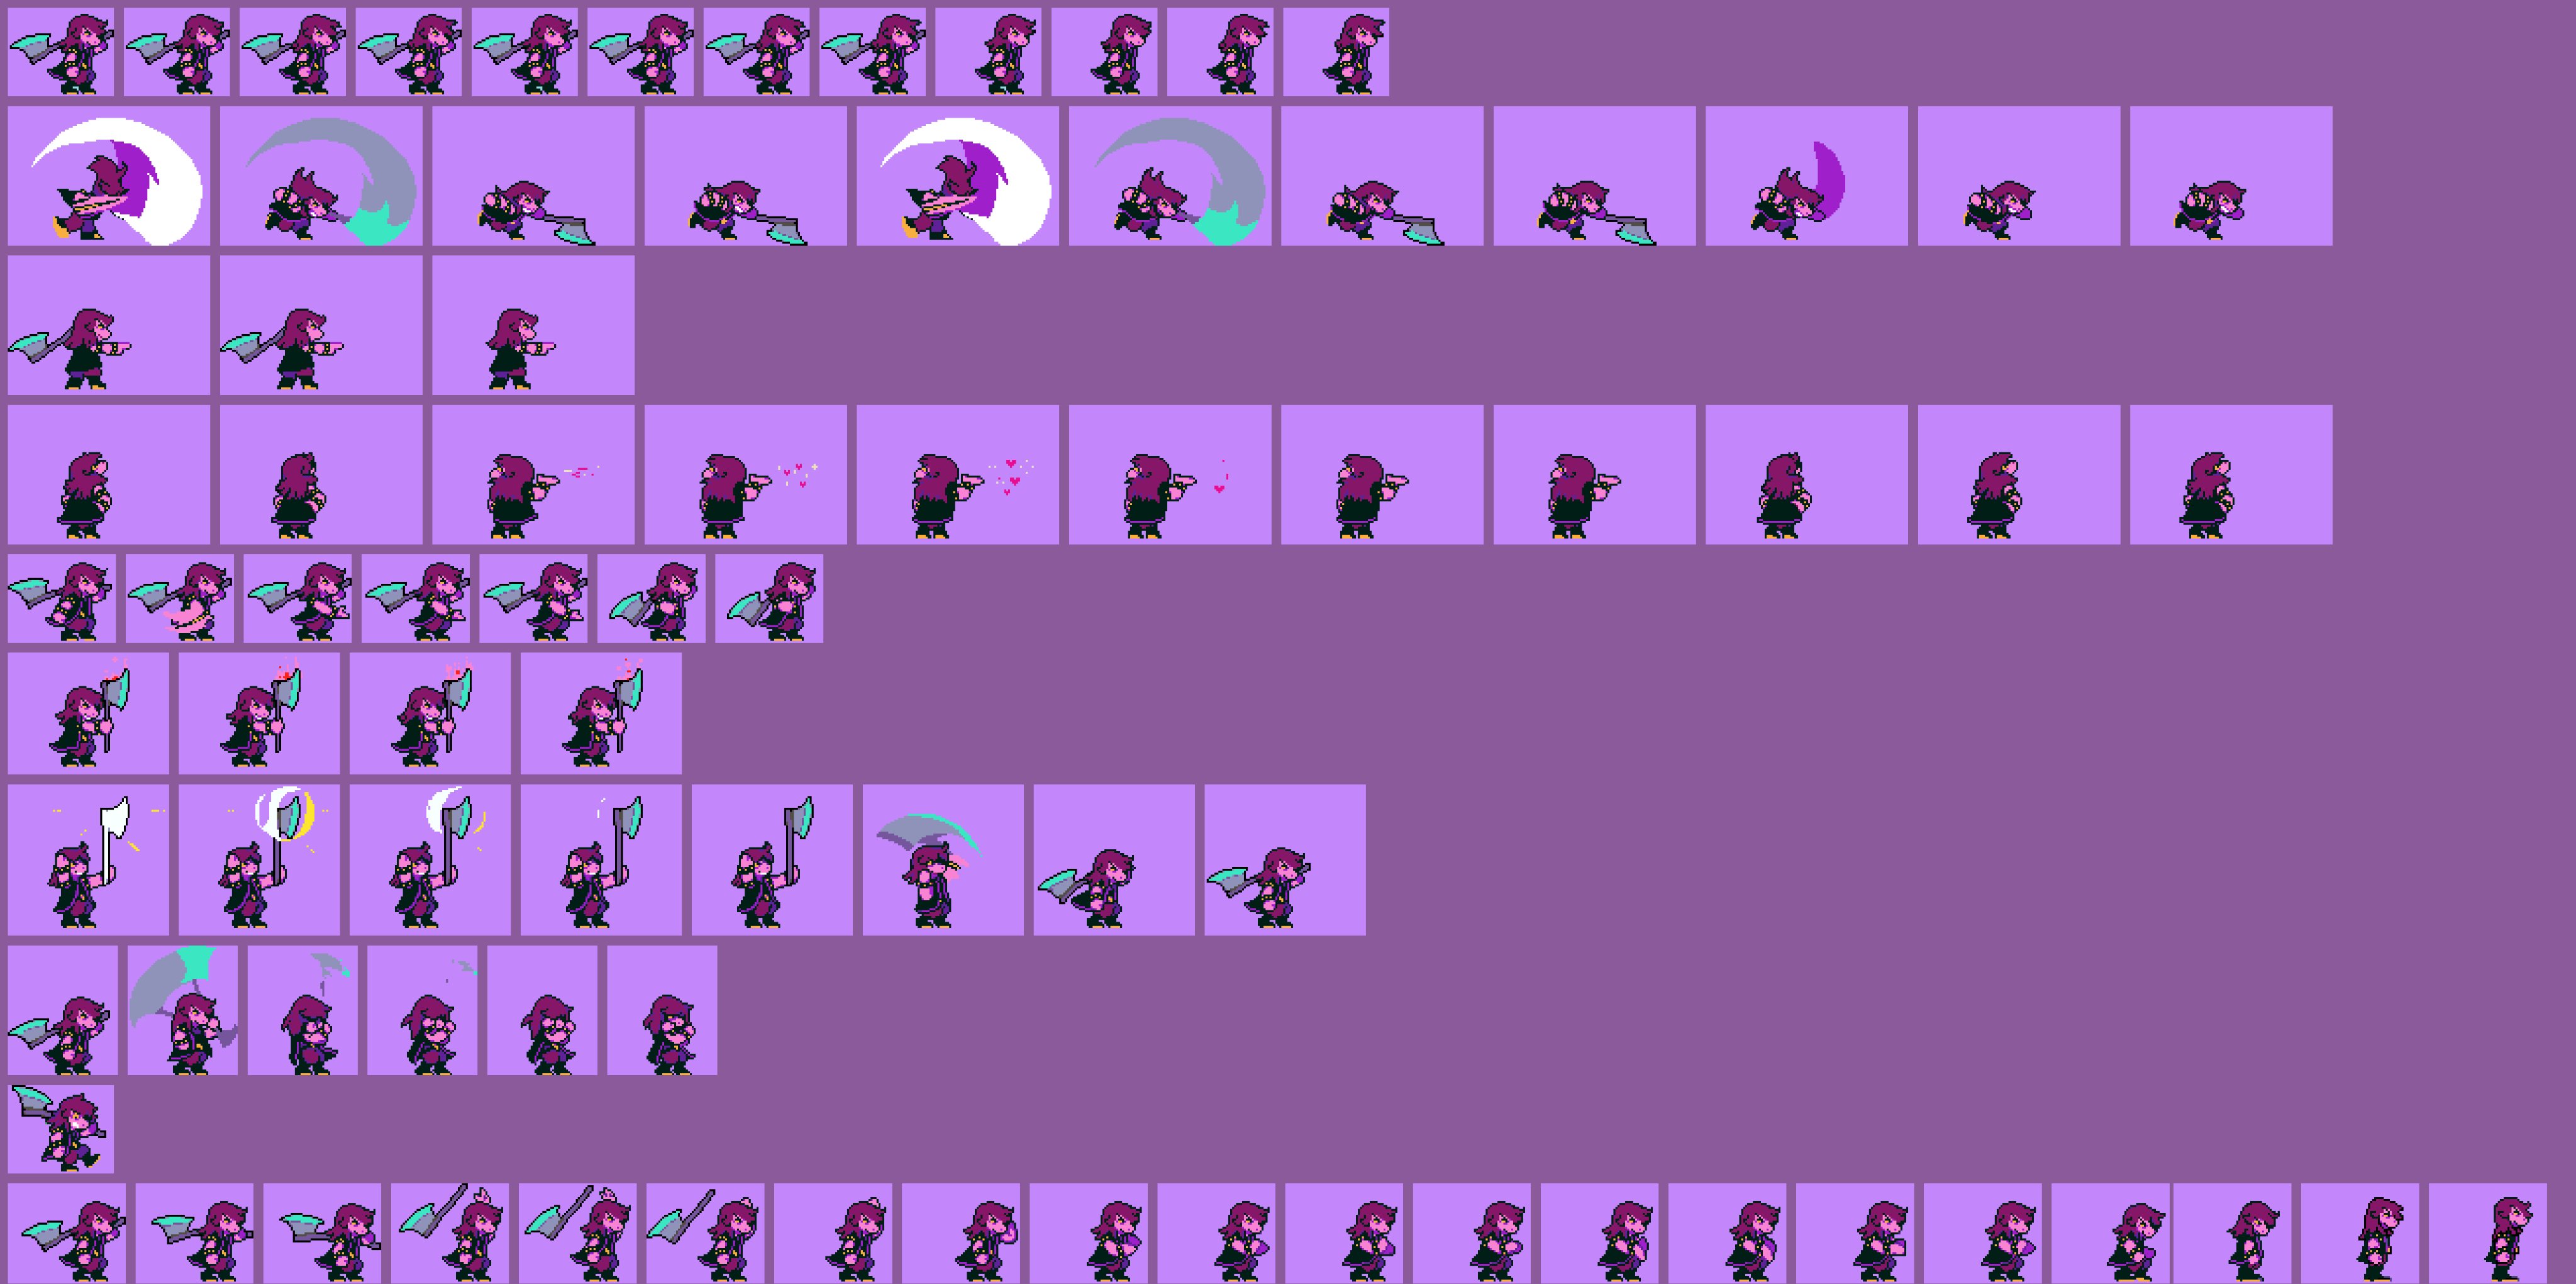 Semi Frequent Undertale Facts on X: * A full sprite sheet for Susie with  her eyes exposed in battle can be found in the games files, however they  go mostly unused since